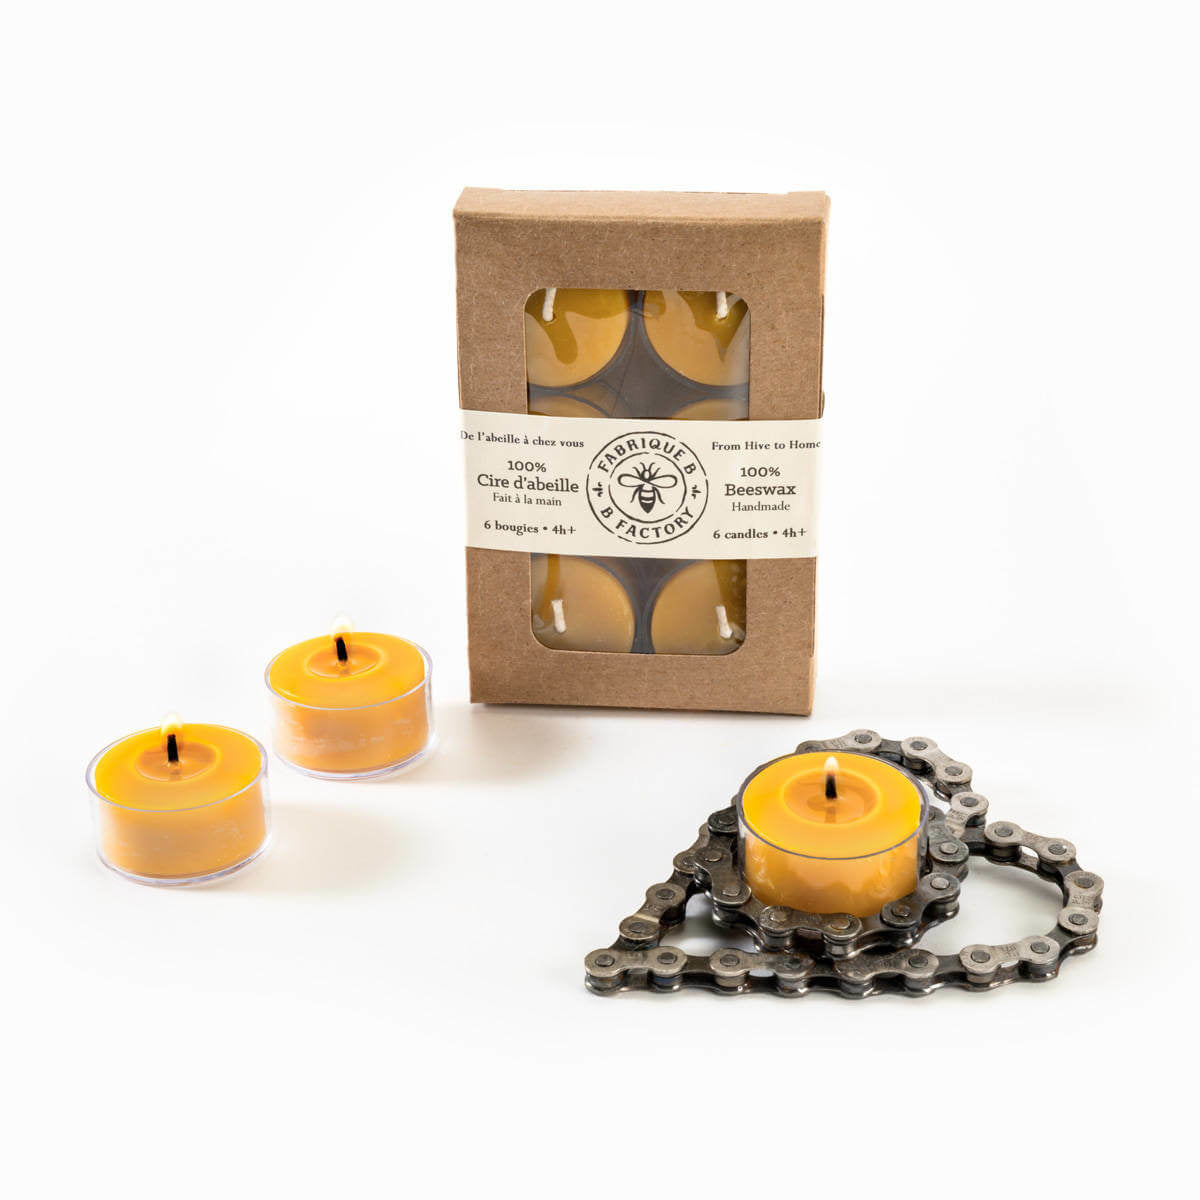 3 lit beeswax tea light candles in front of gift box with 6 pure beeswax tea light candles by B Factory